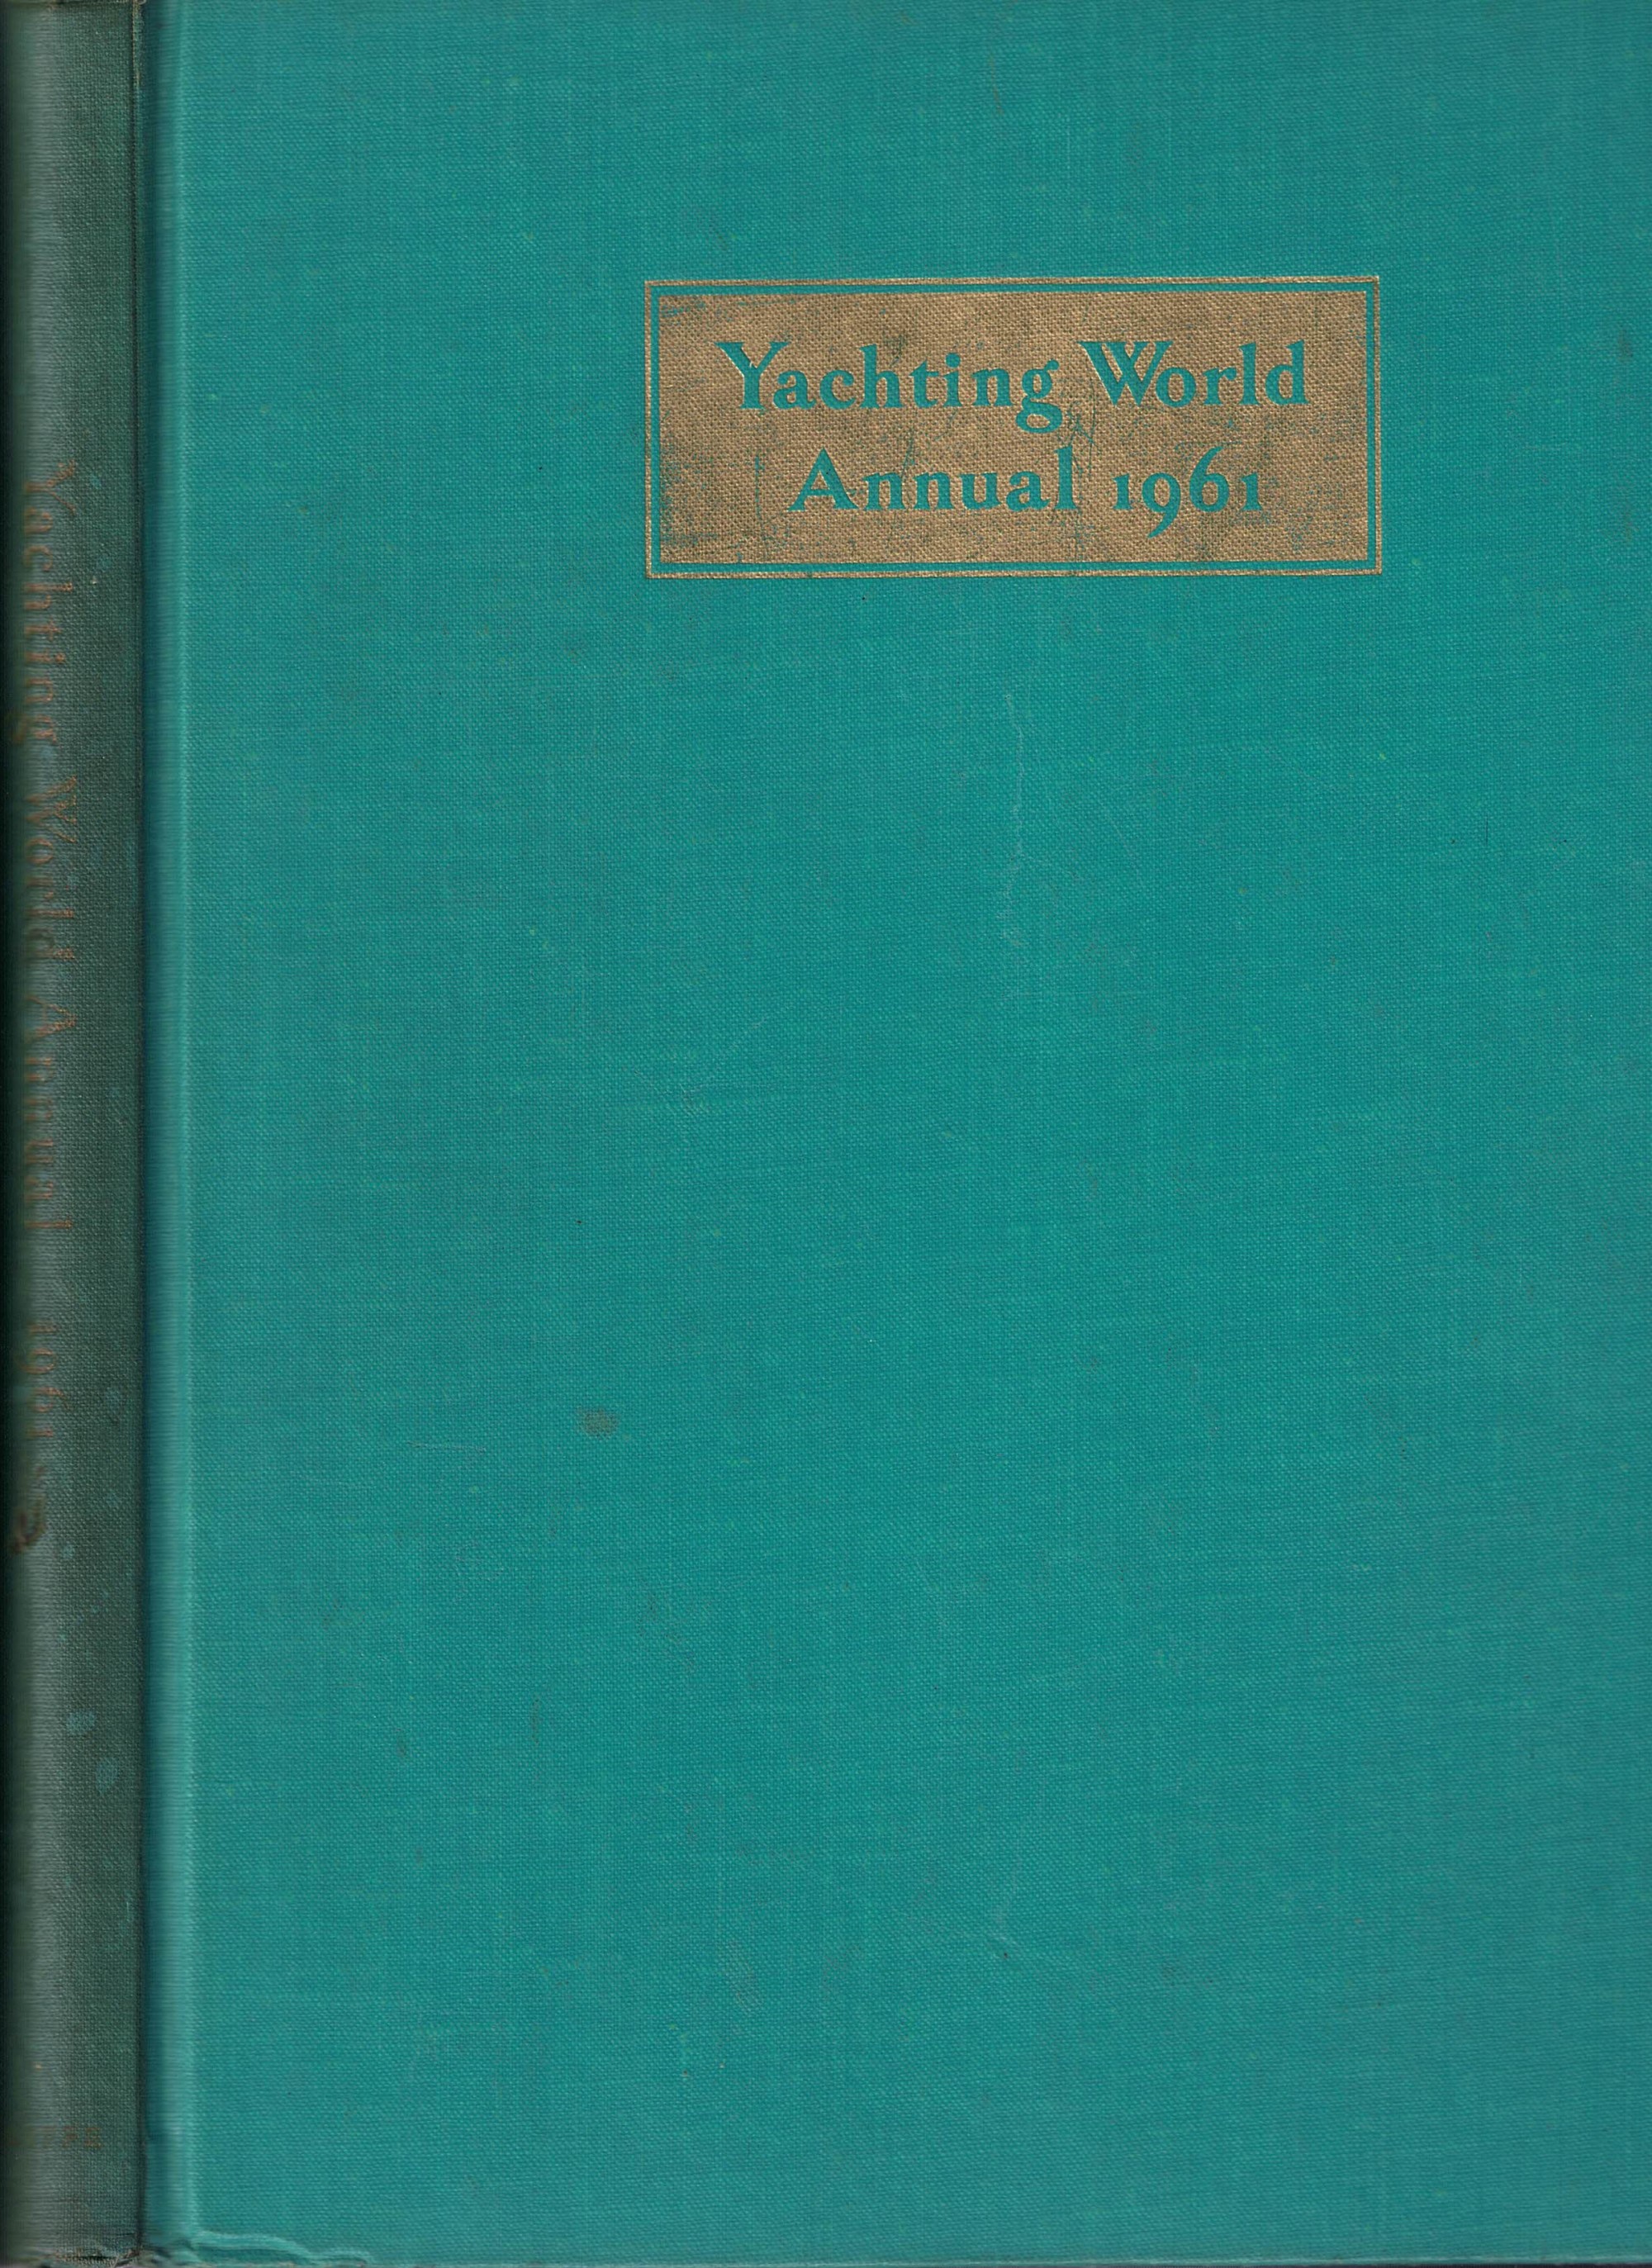 Yachting World Annual 1961